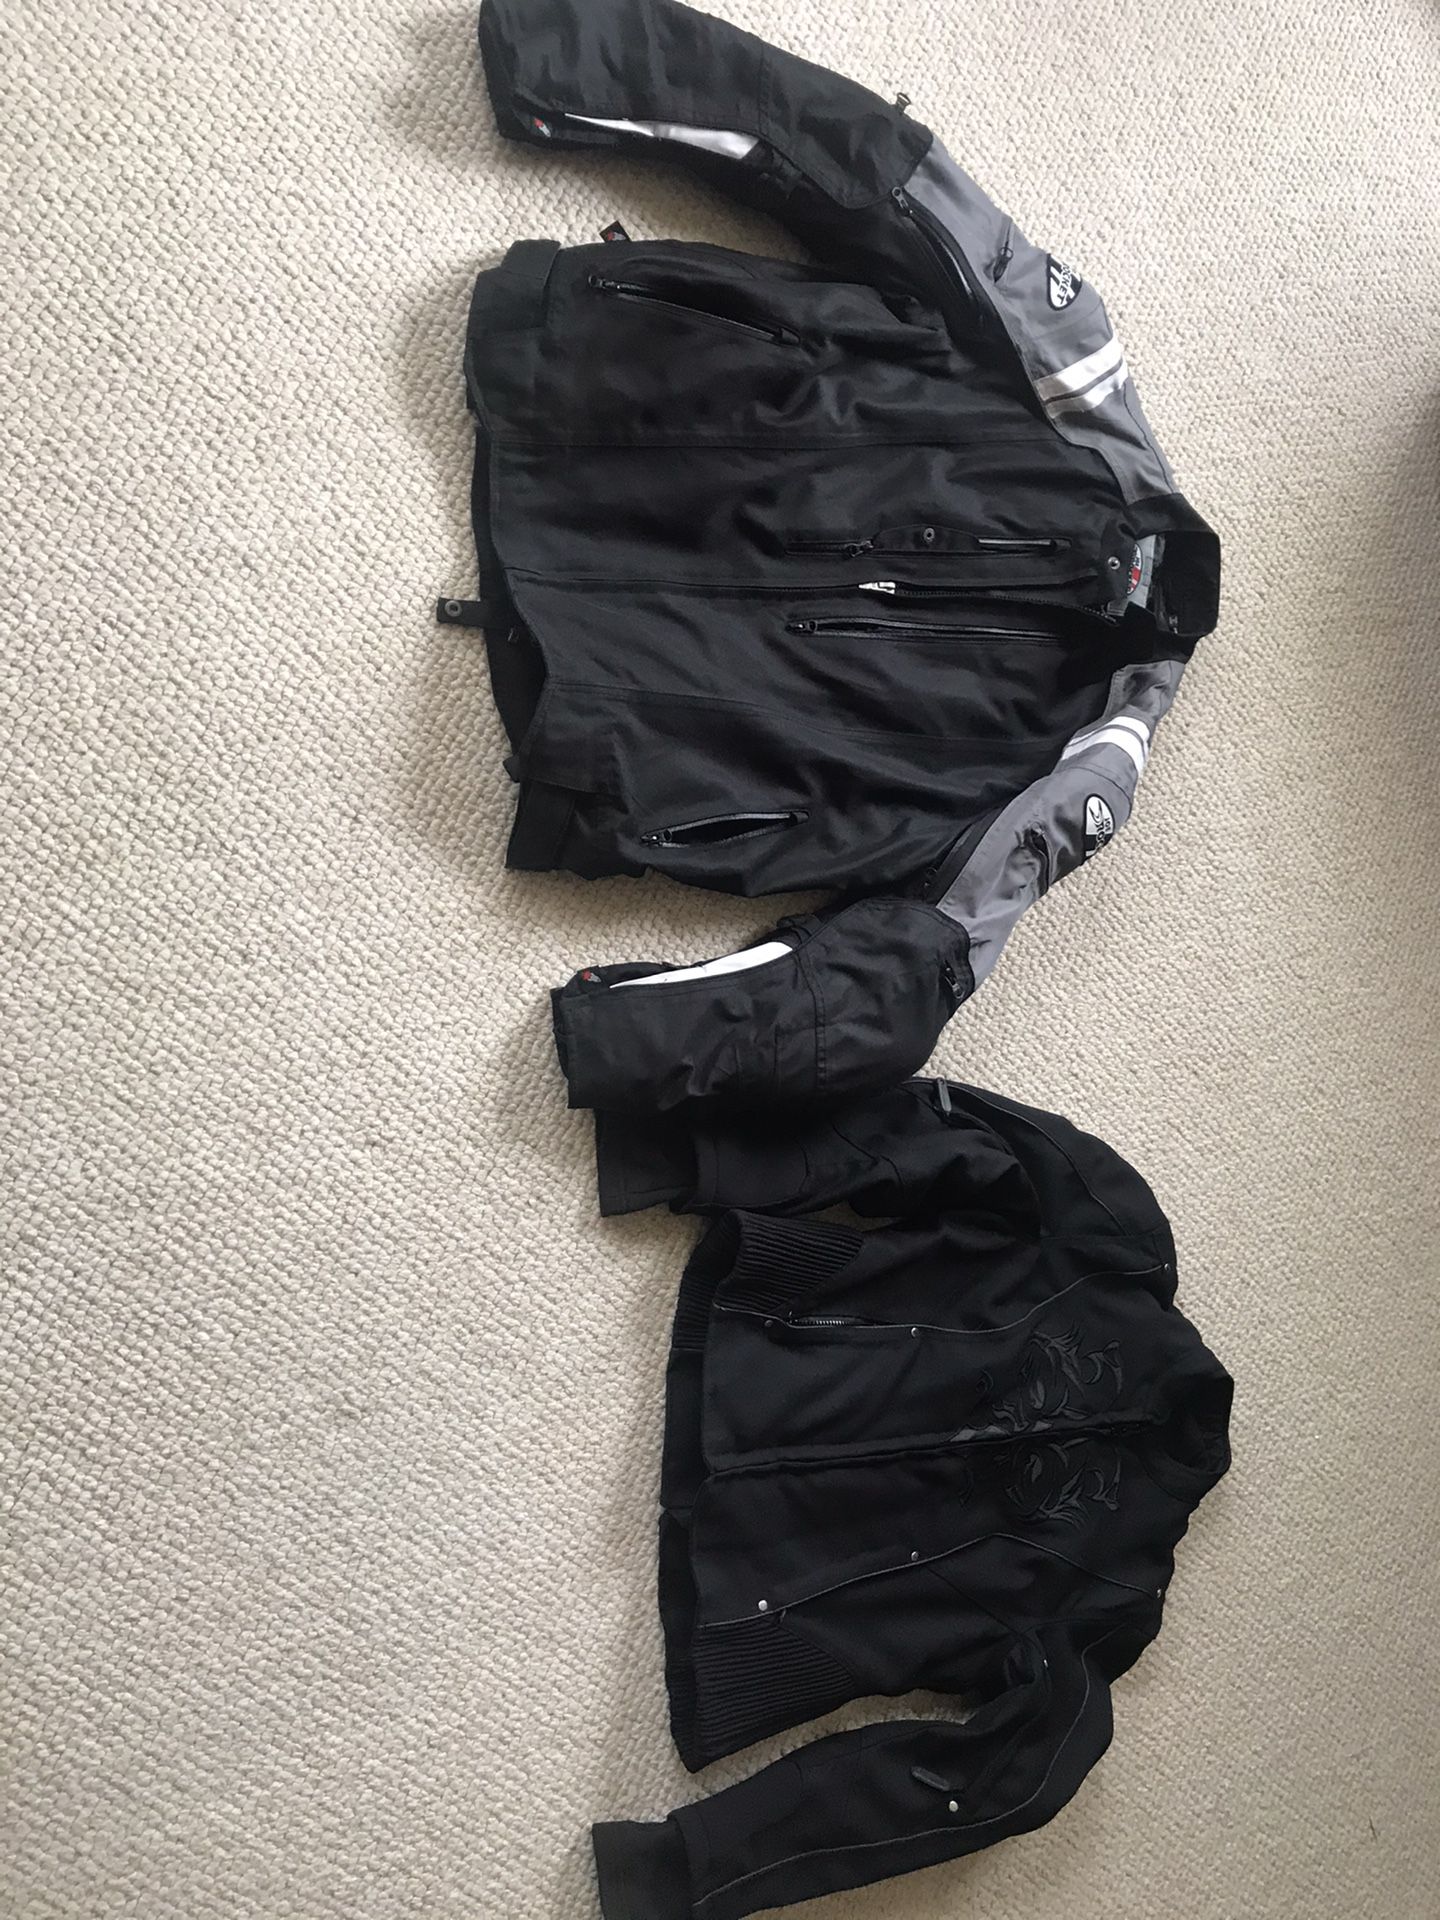 Motorcycle jackets Men’s are 2XL the women’s is a medium. 100 per jacket or 150 for two. These are barley used